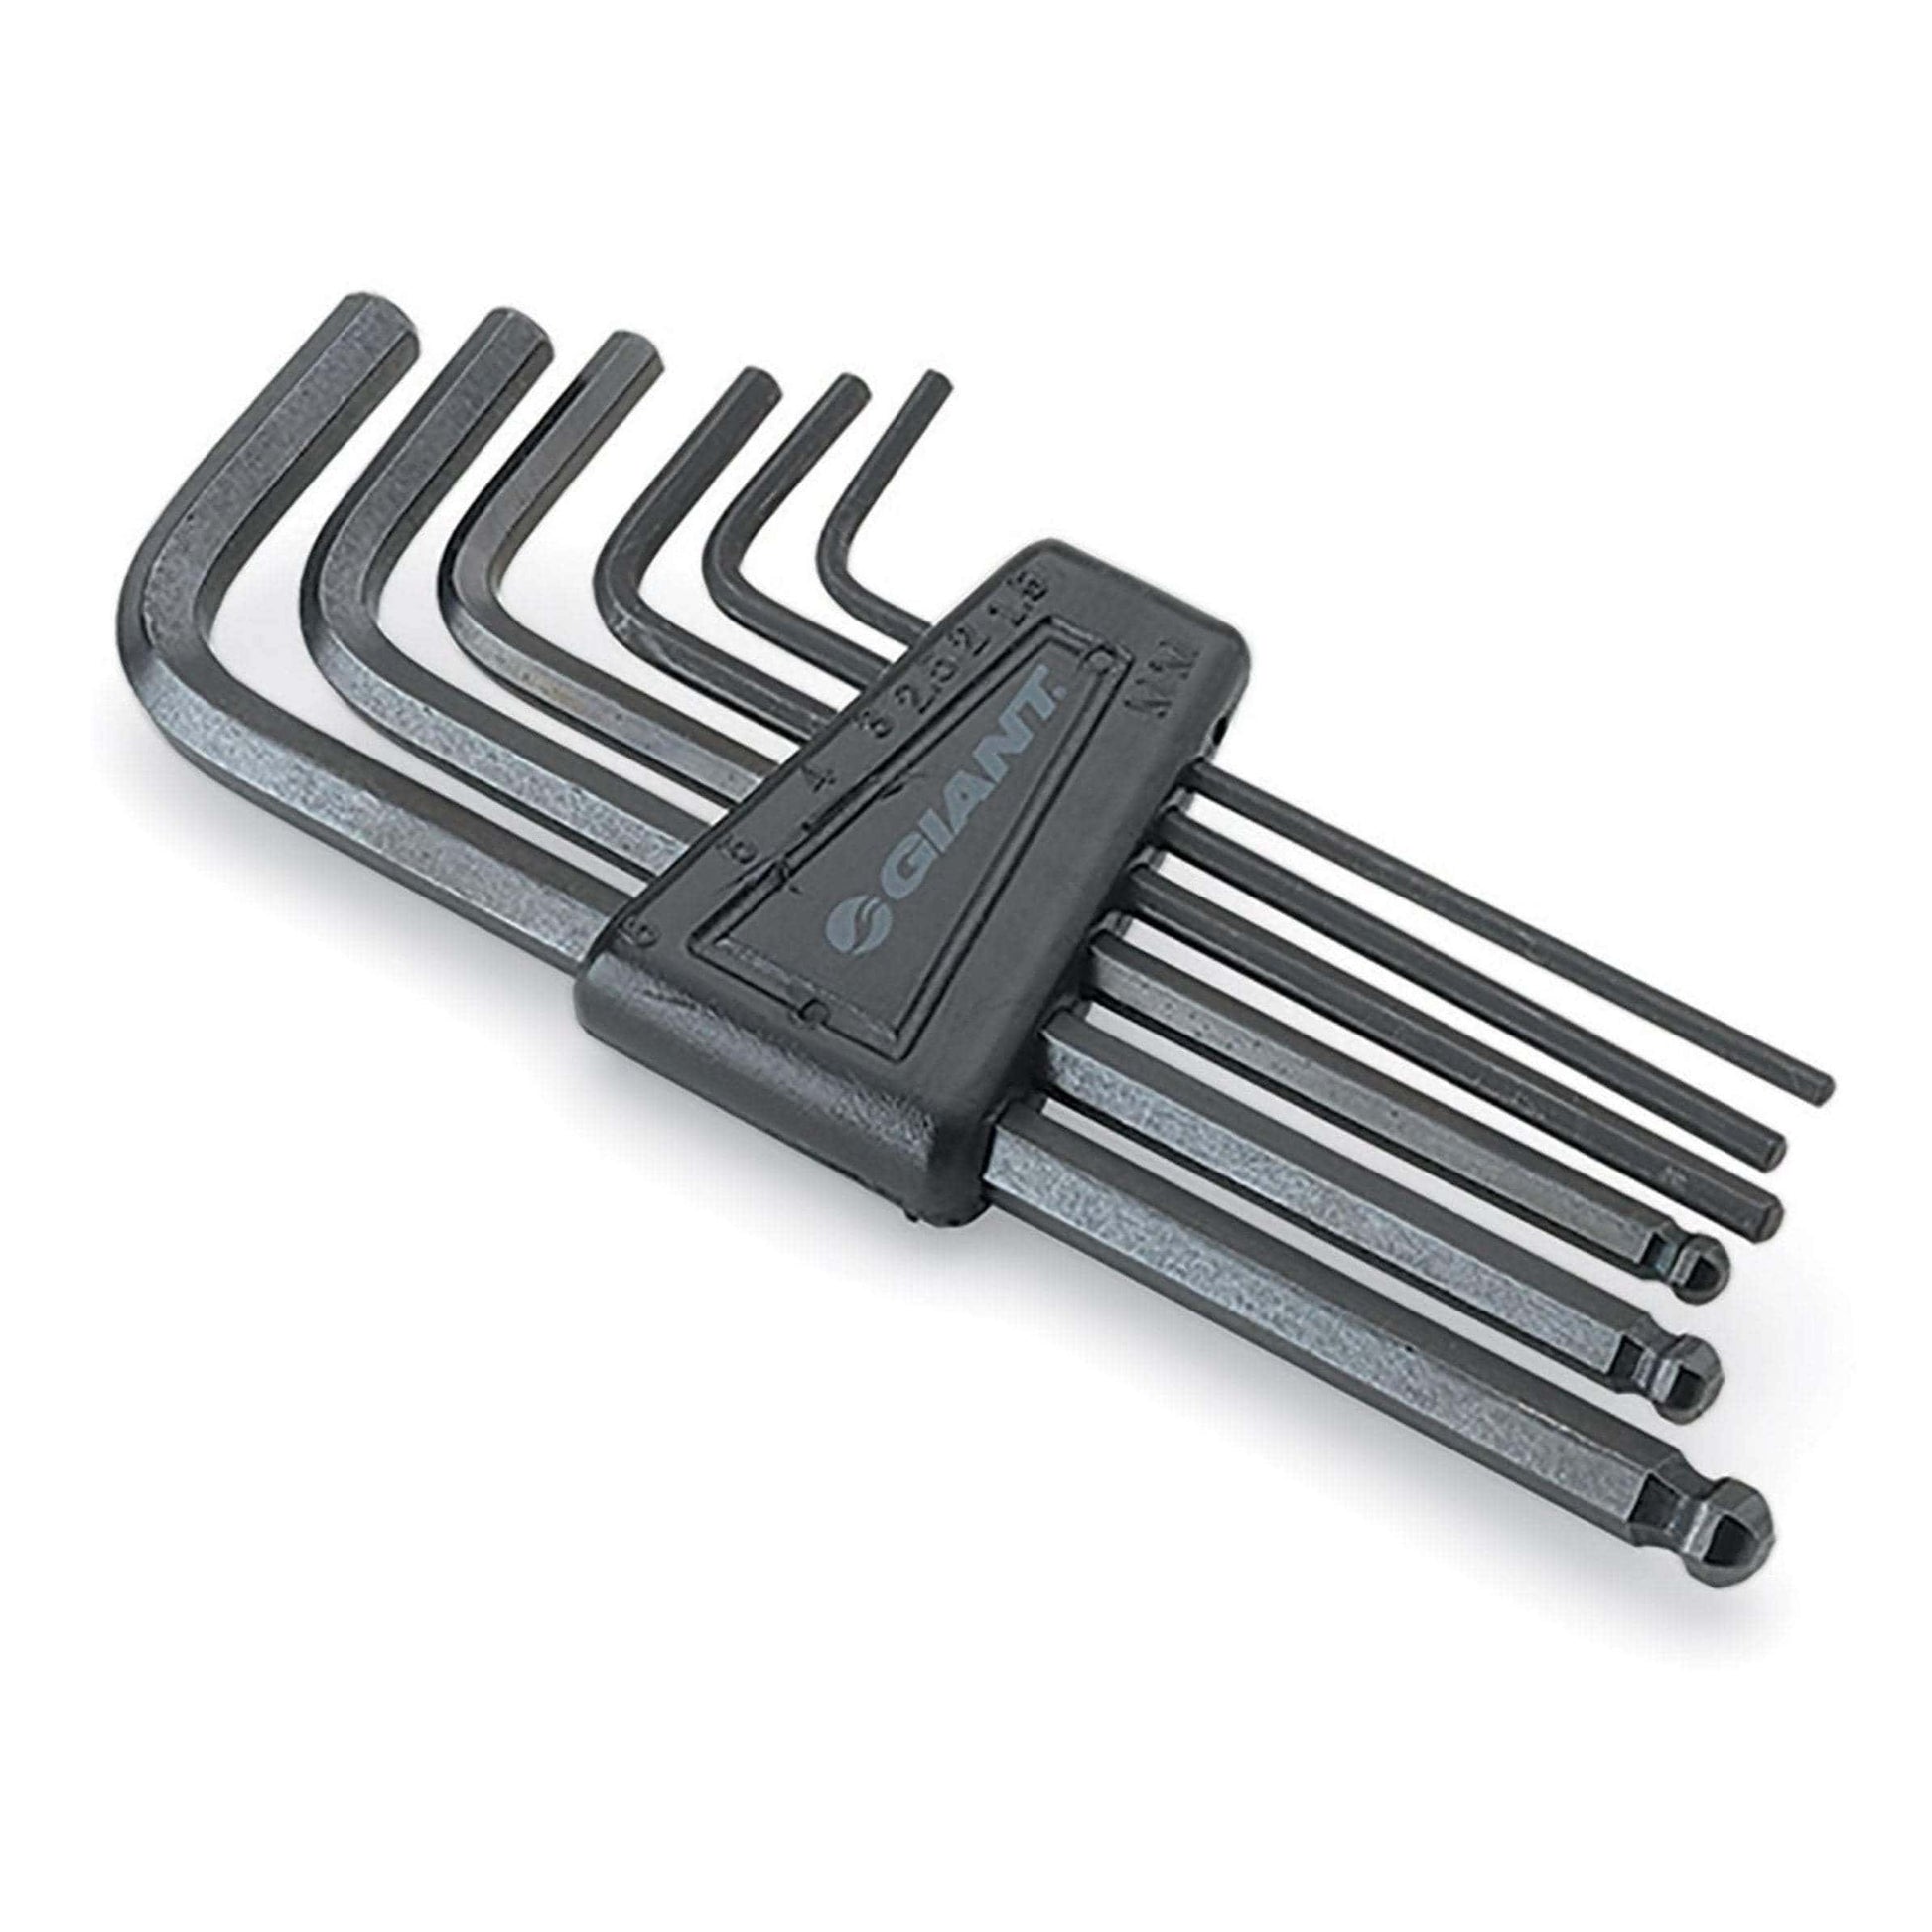 Giant Ball-End Bike Hex Wrench Set